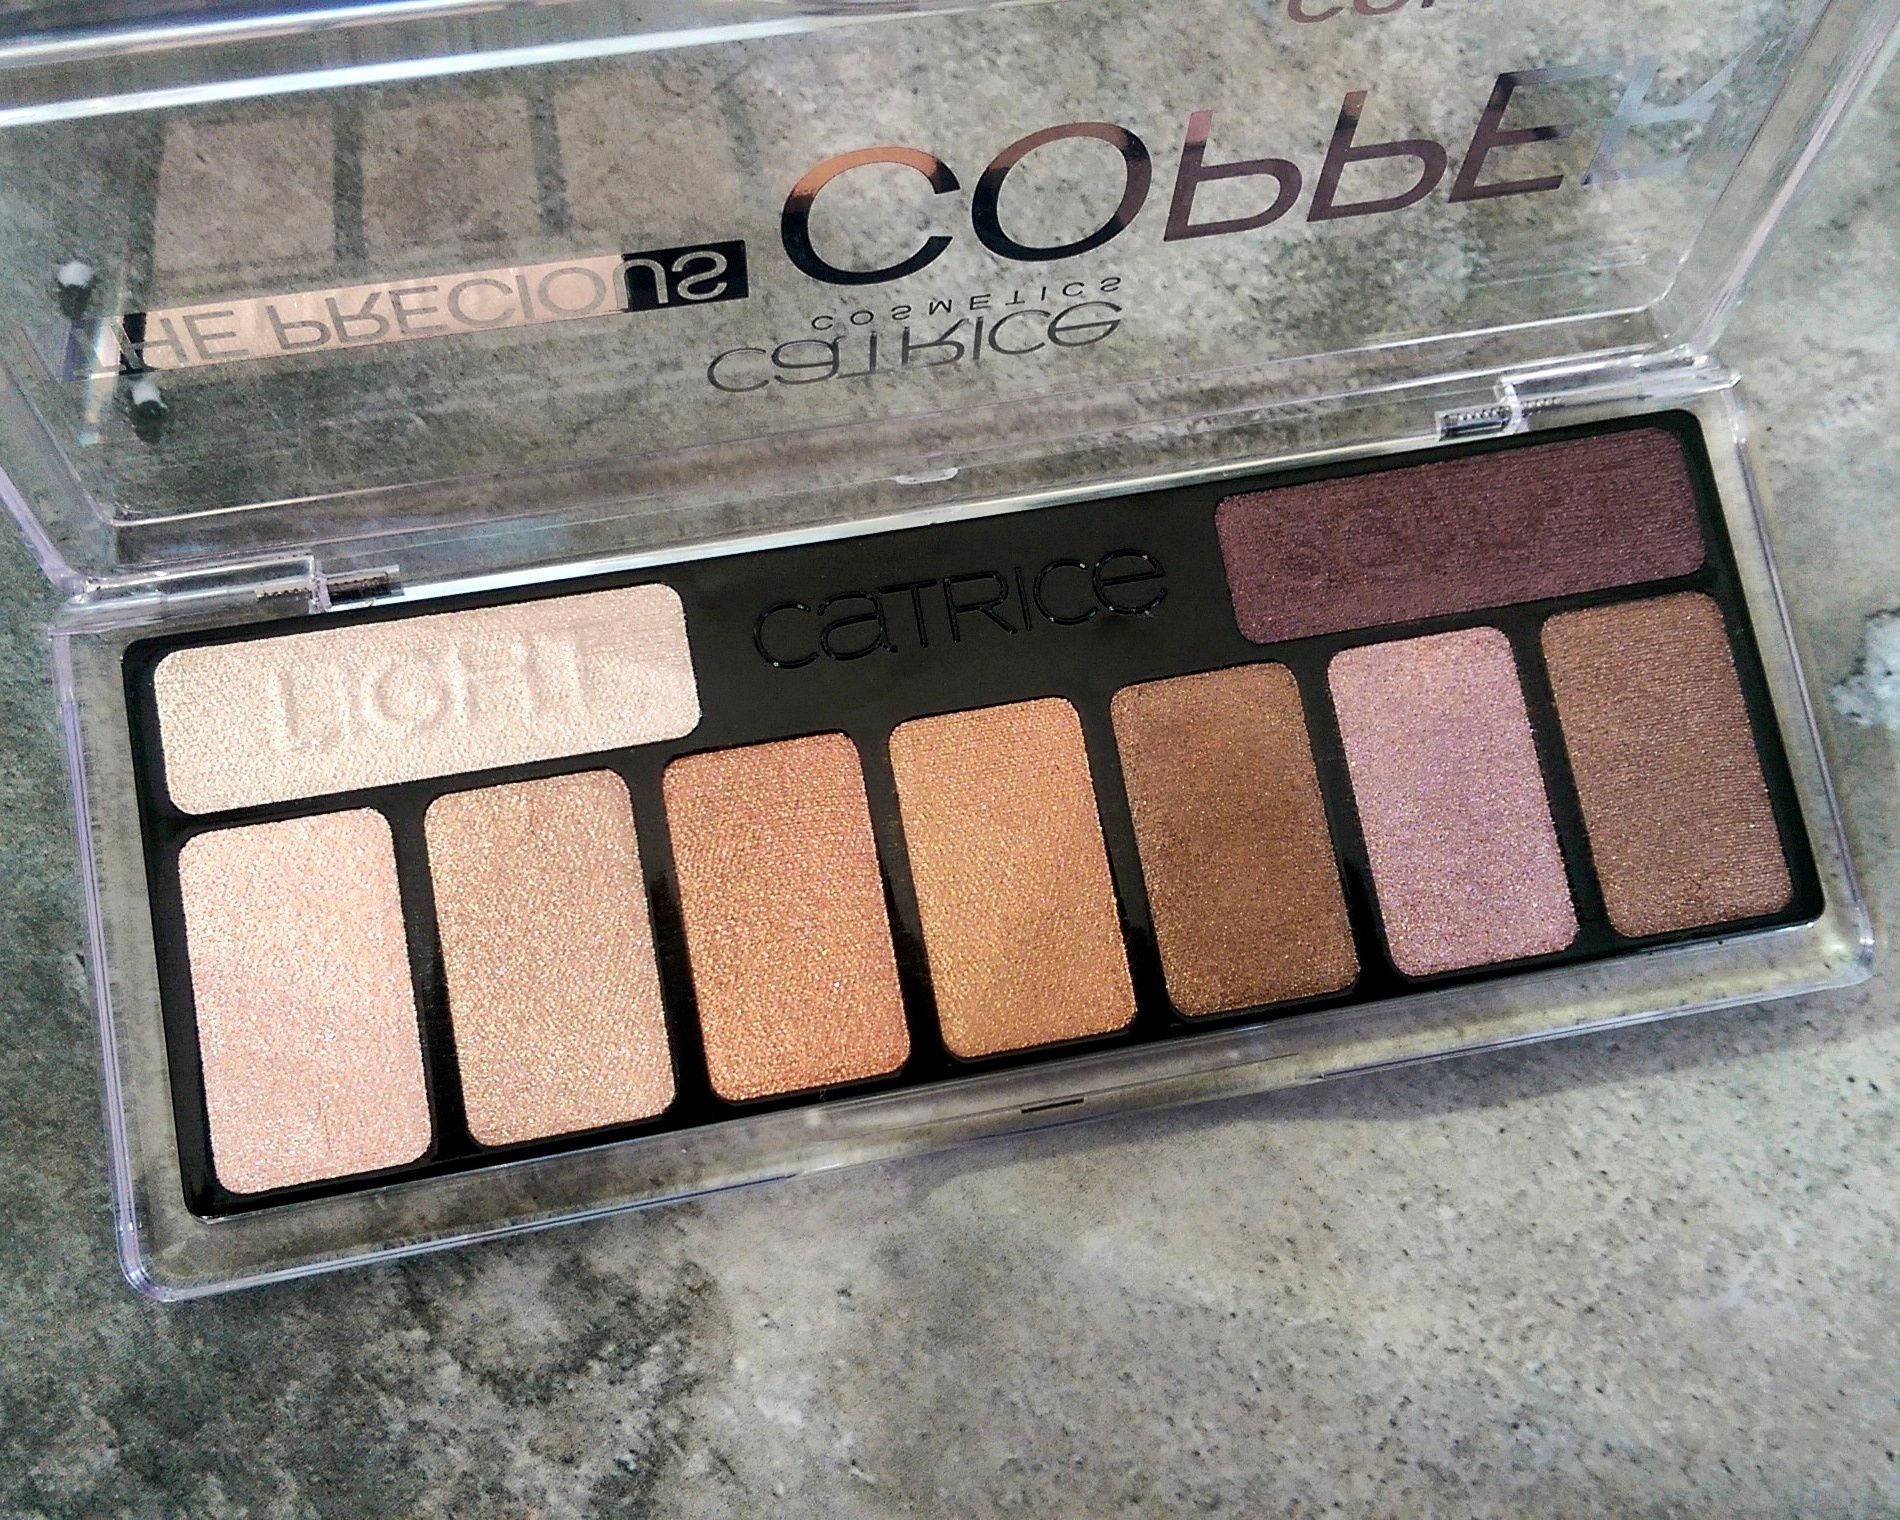 Review: Catrice The Precious Copper eye shadow palette – Lipgloss is my Life